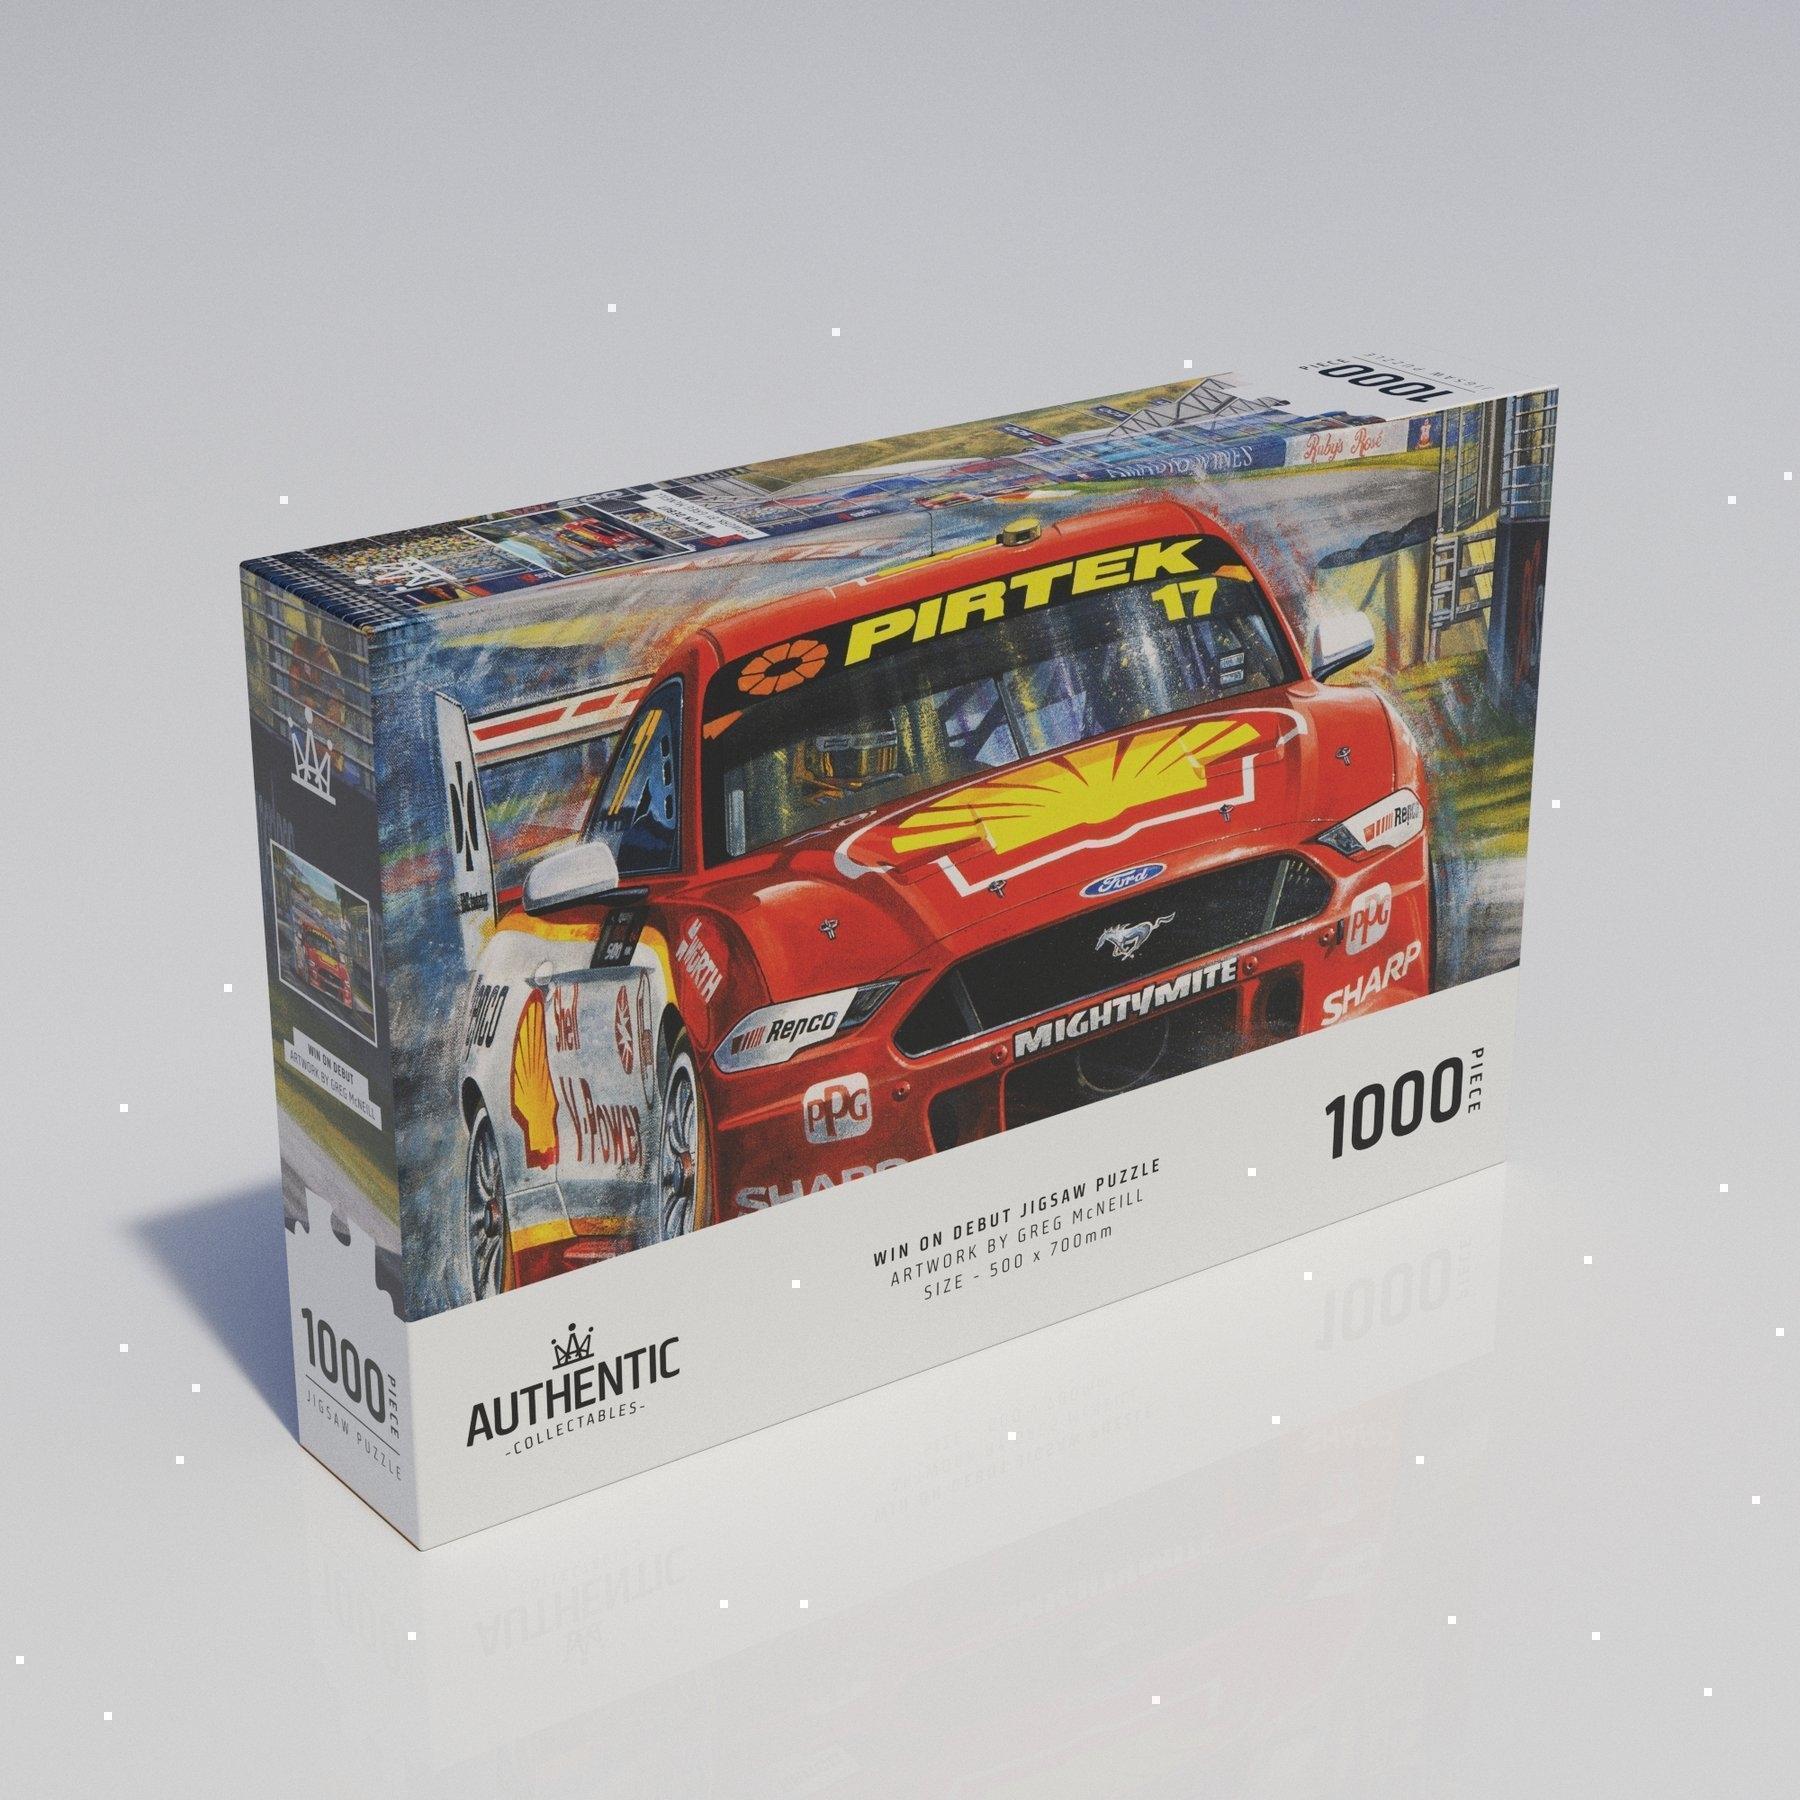 Win On Debut 1000 Piece Jigsaw Puzzle Motorsport Theme By Greg McNeill